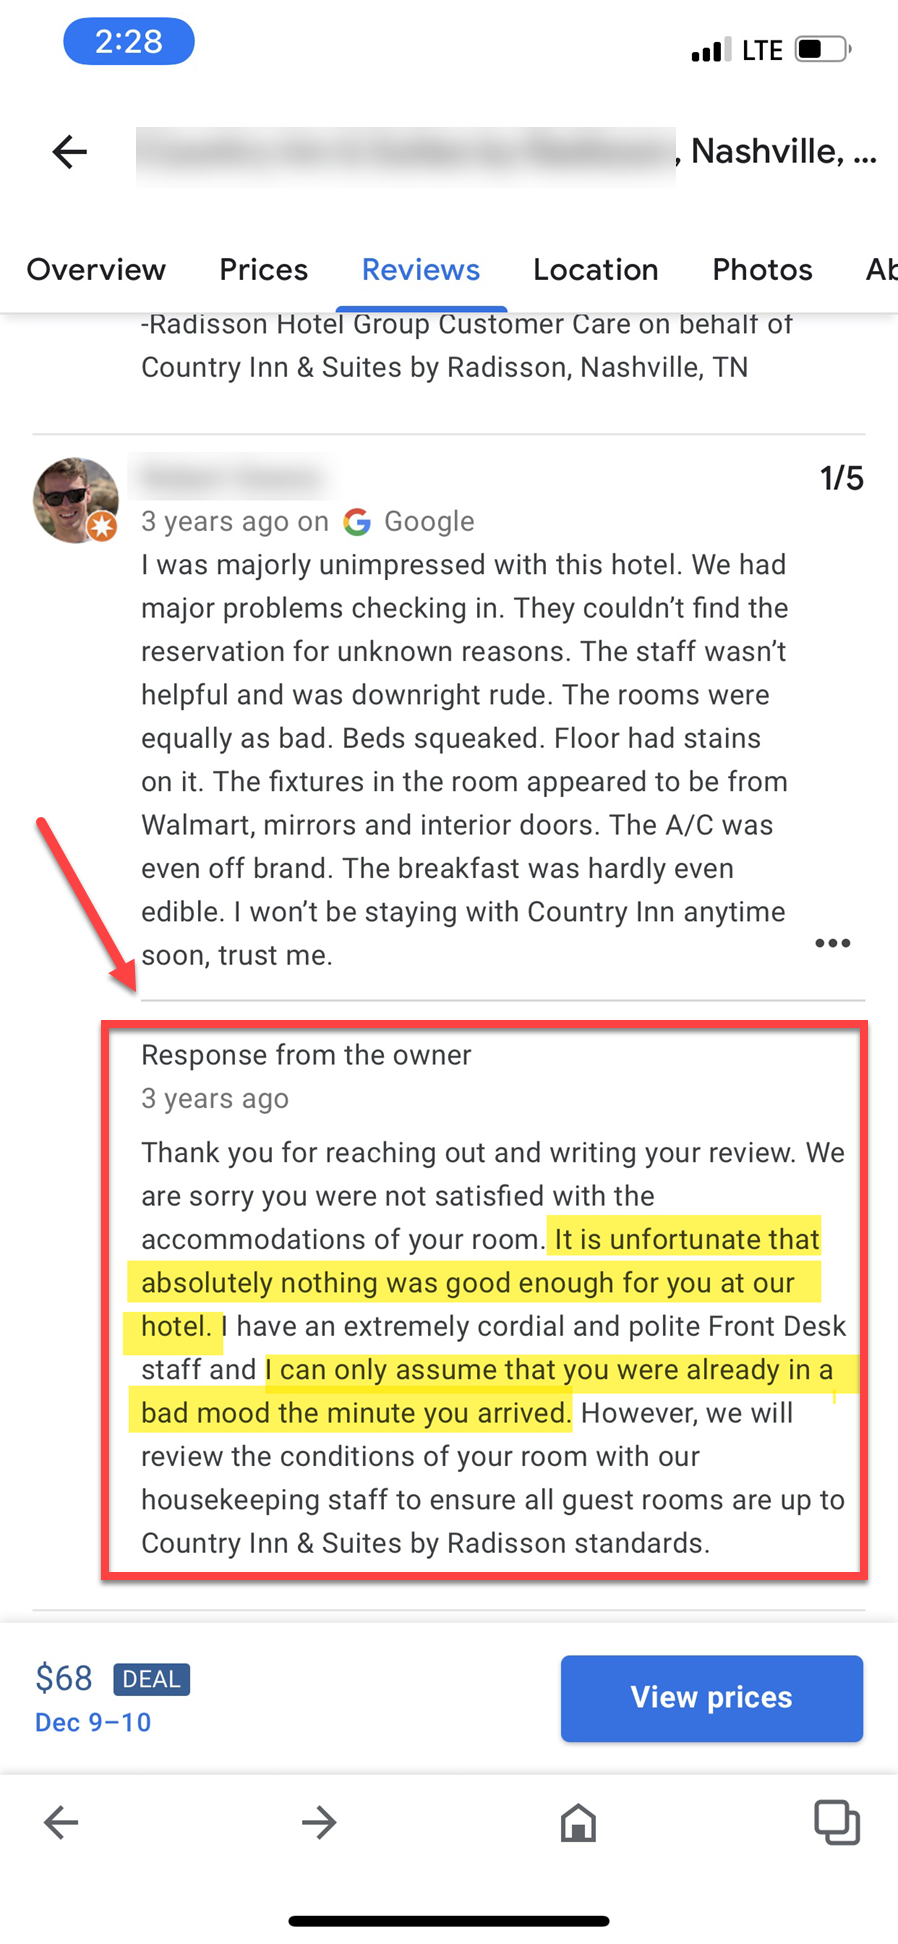 Bad owner response to a negative review